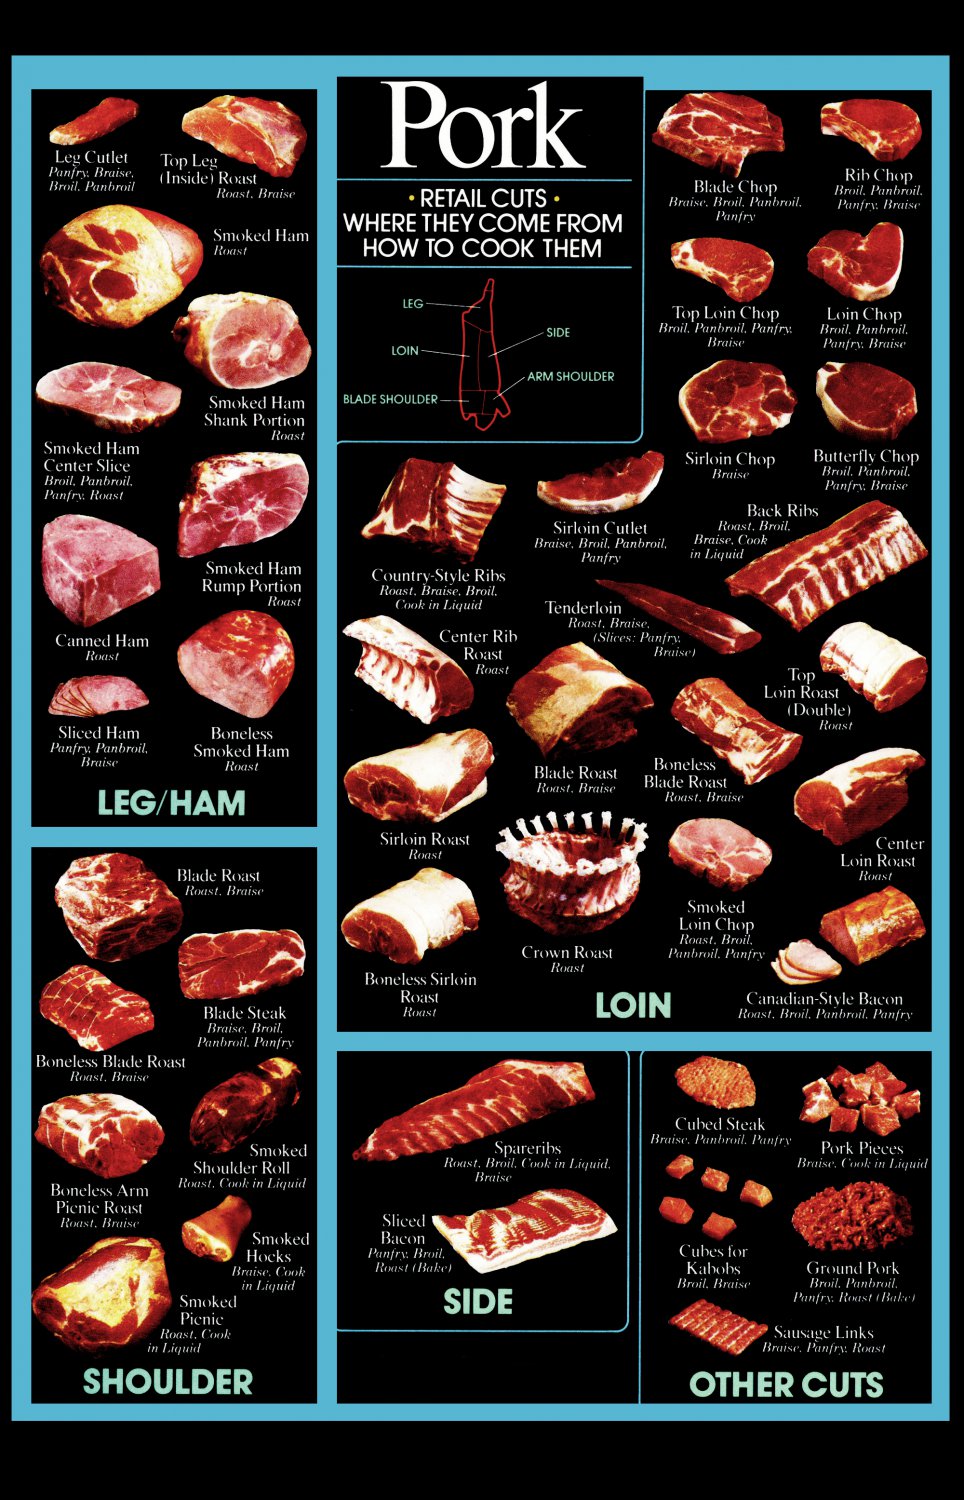 Pork Cuts Where they come from How to cook them Chart 18"x28" (45cm/70cm) Poster